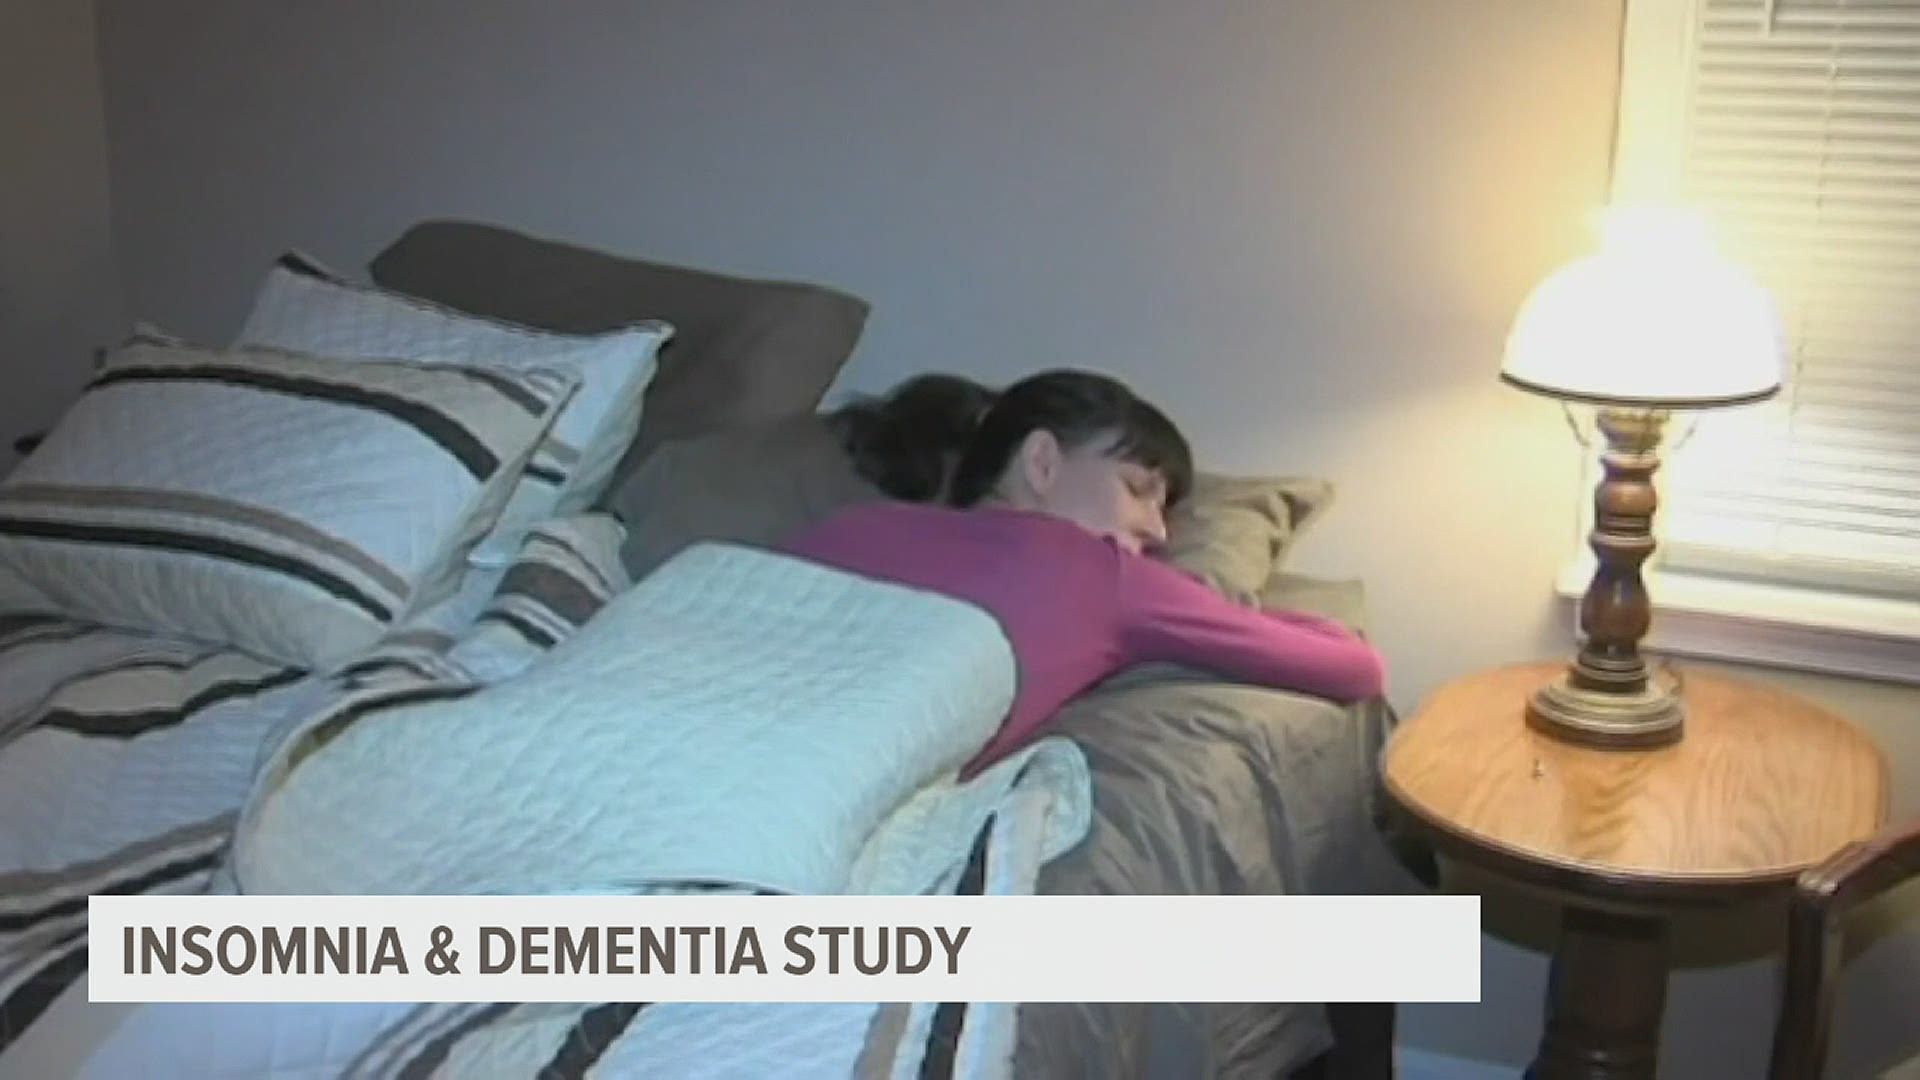 The findings could help predict which insomnia sufferers are at risk of cognitive impairment.